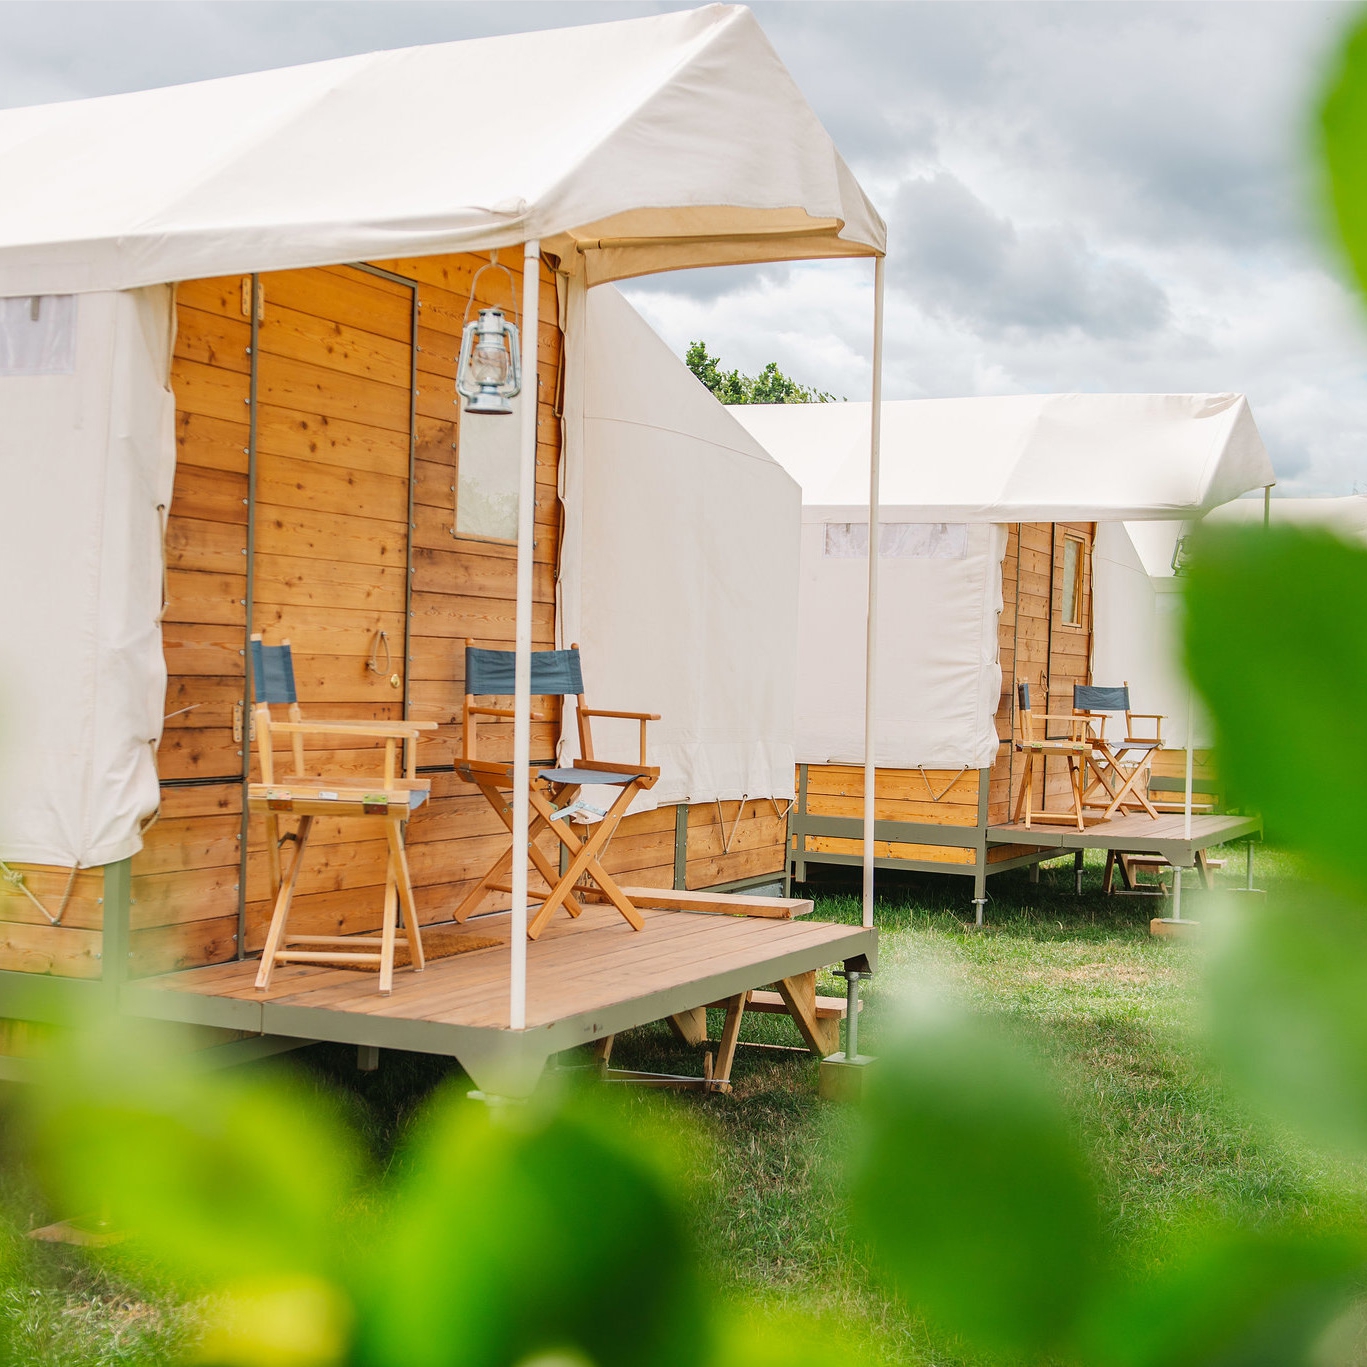 Are Glamping Yurts Yet Another Cultural Appropriation in The West?